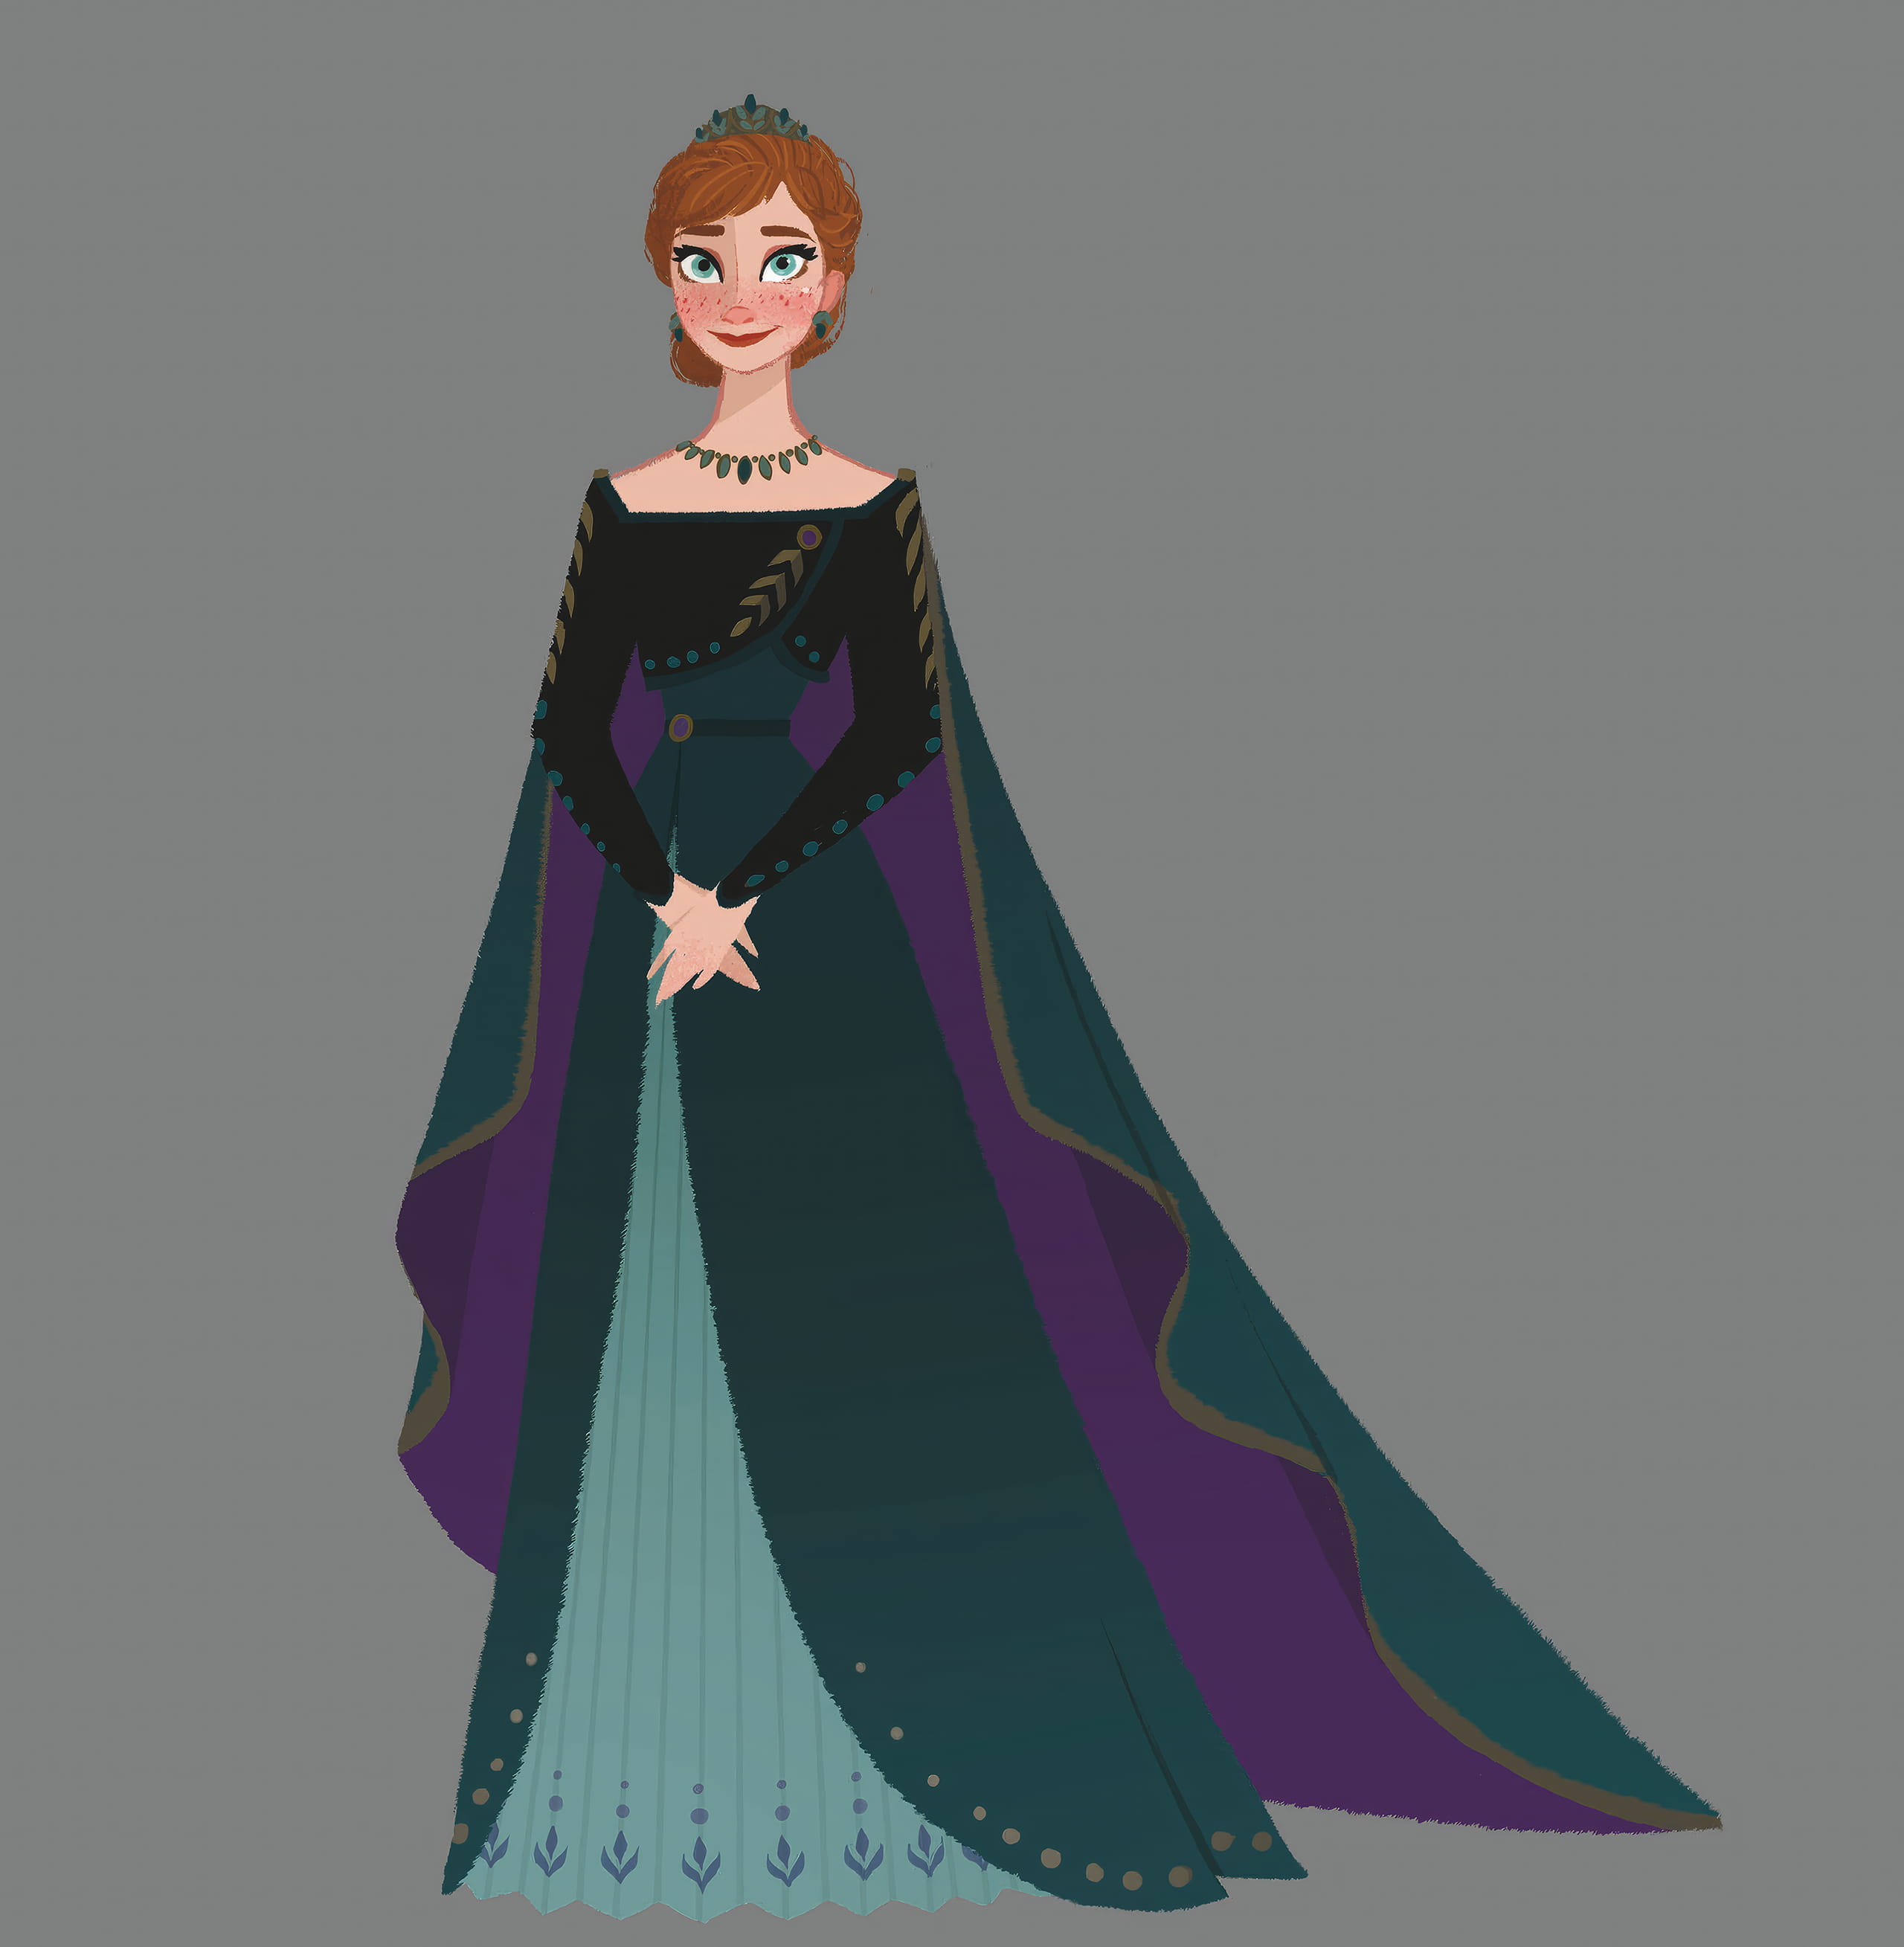 Anna&rsquo;s town ceremony dress